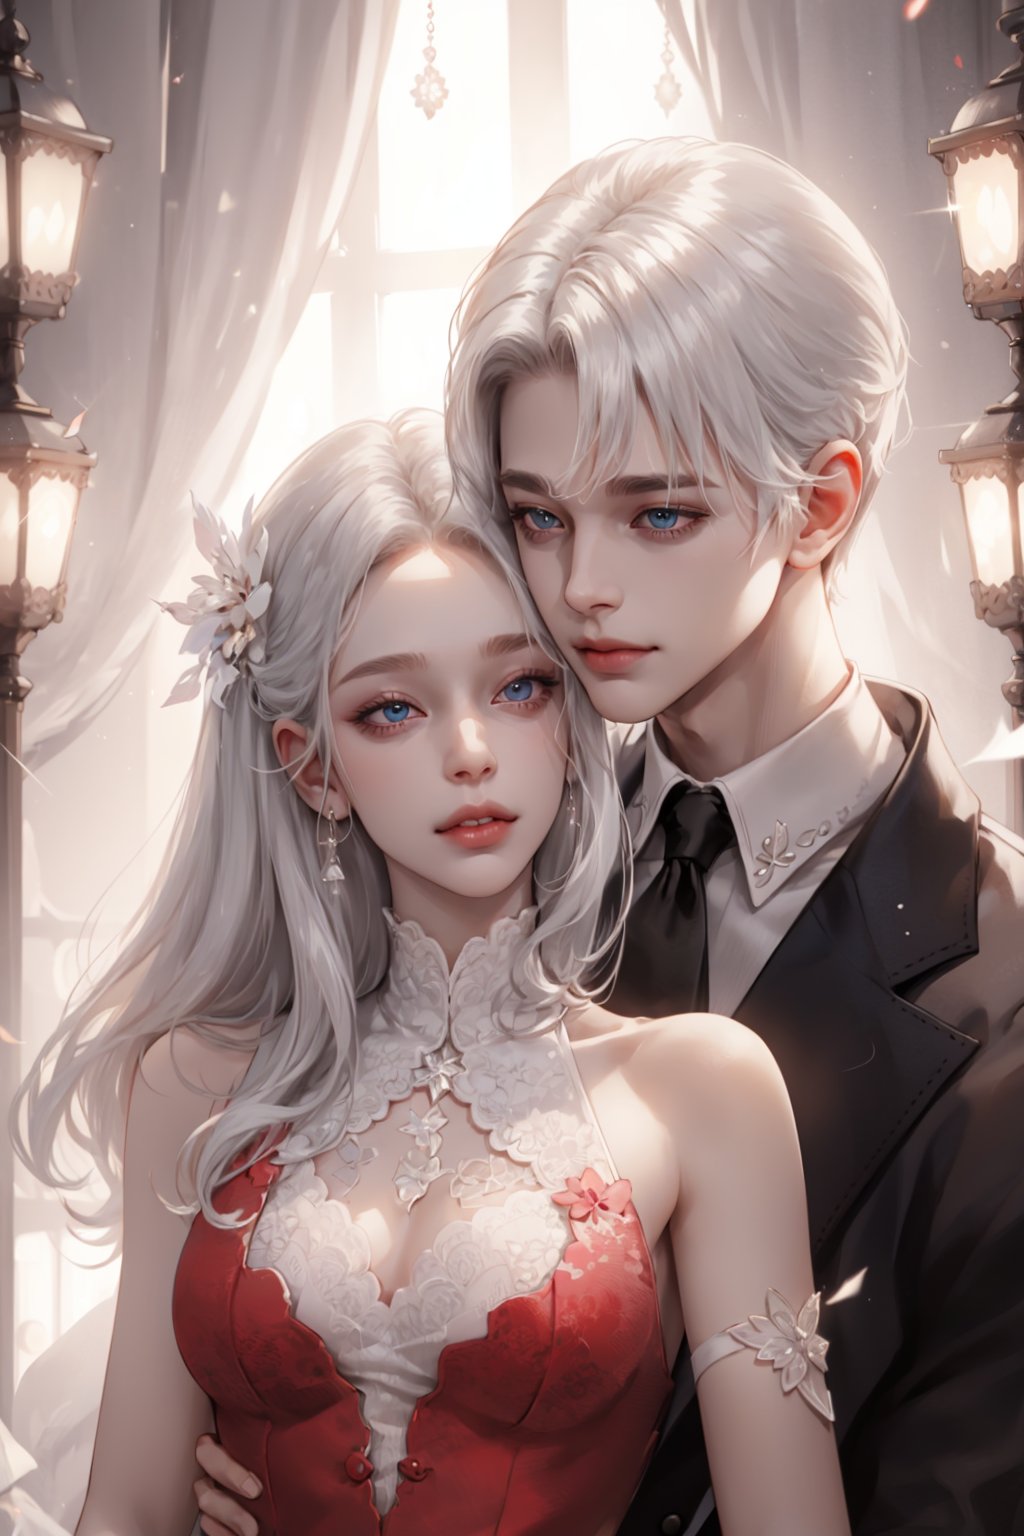 (asterpiece:1.2, best quality), (Soft light), (shiny skin), couple, romantic, kingdom, silver hair, red_hair_woman, silver_hair_boy, eyelashes, collarbone, victorian, blue eyes, silver short hair boy,long_curly_red_hair_woman, red hair girl, short_silver_hair_boy, silver_hair_boy, couple, happy face, hugging, formal dress, romantic